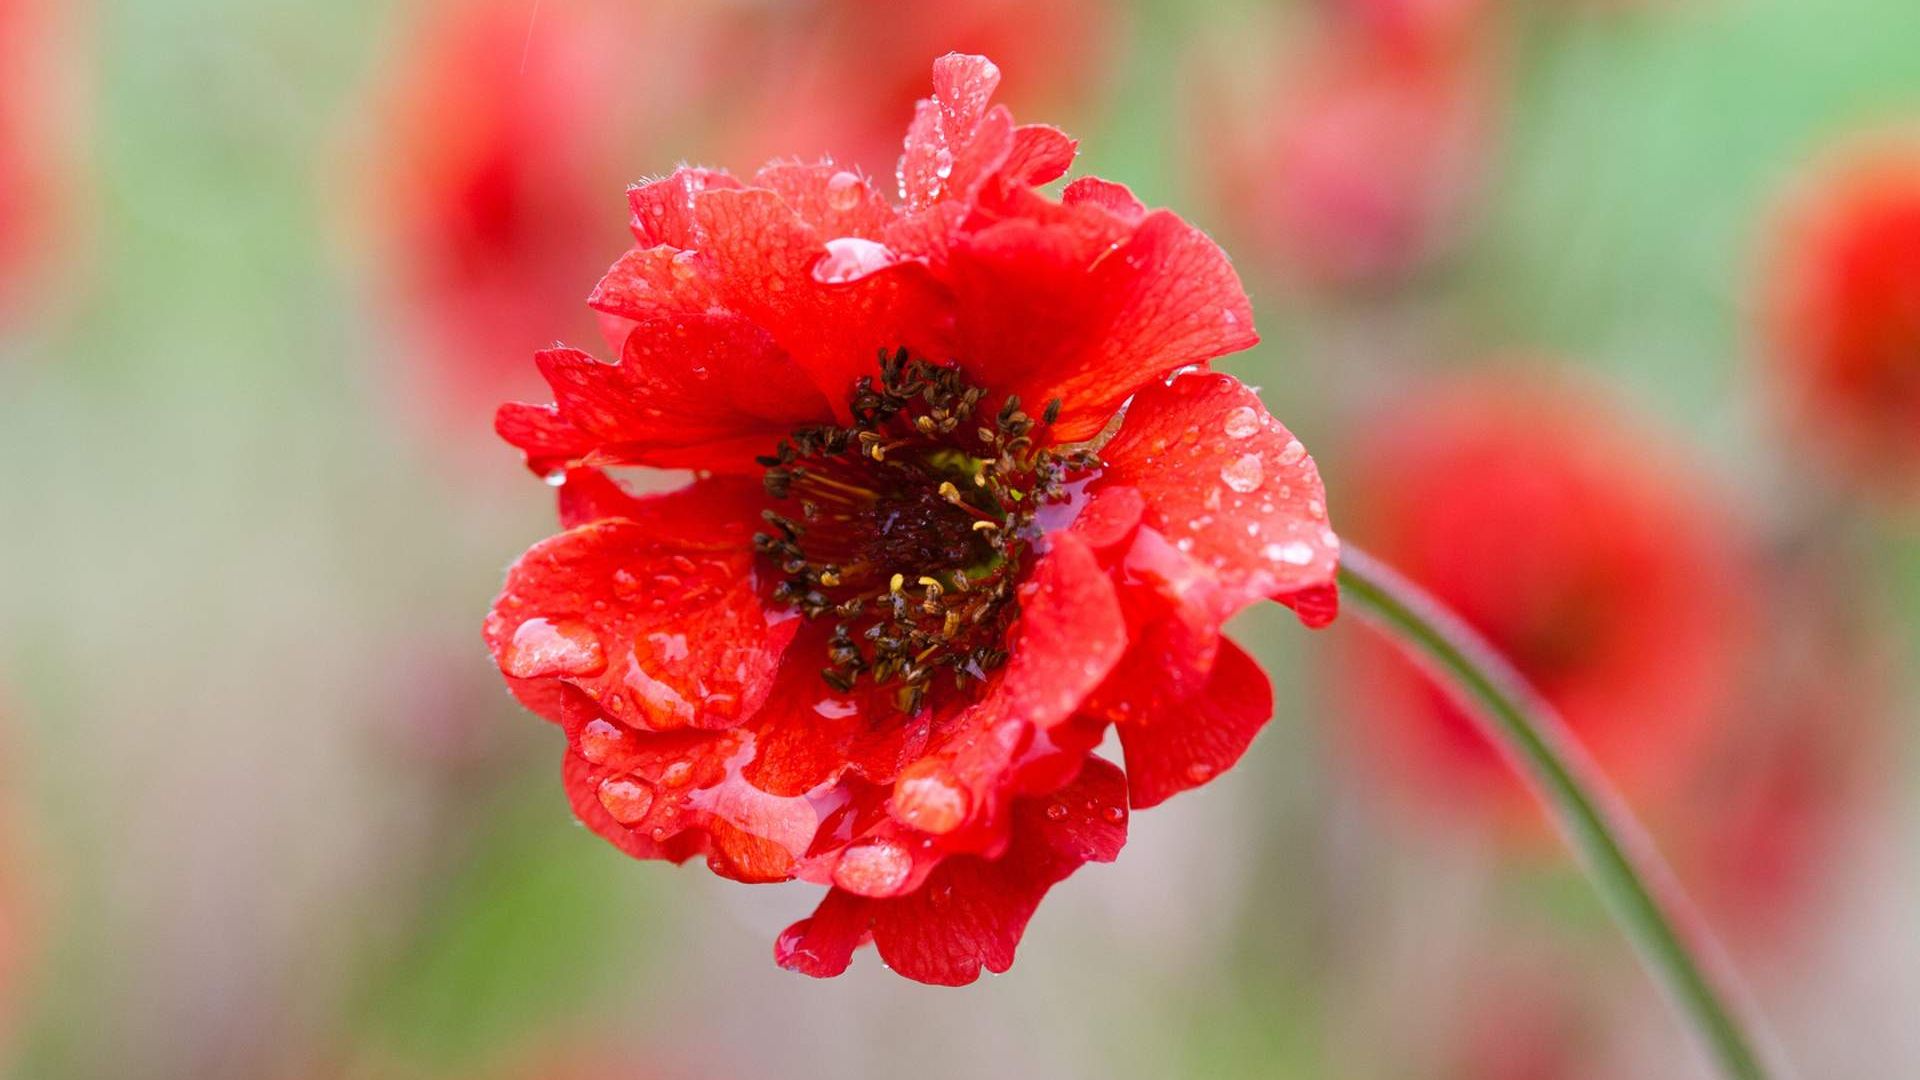 Wallpaper The Red Poppy flower, close up